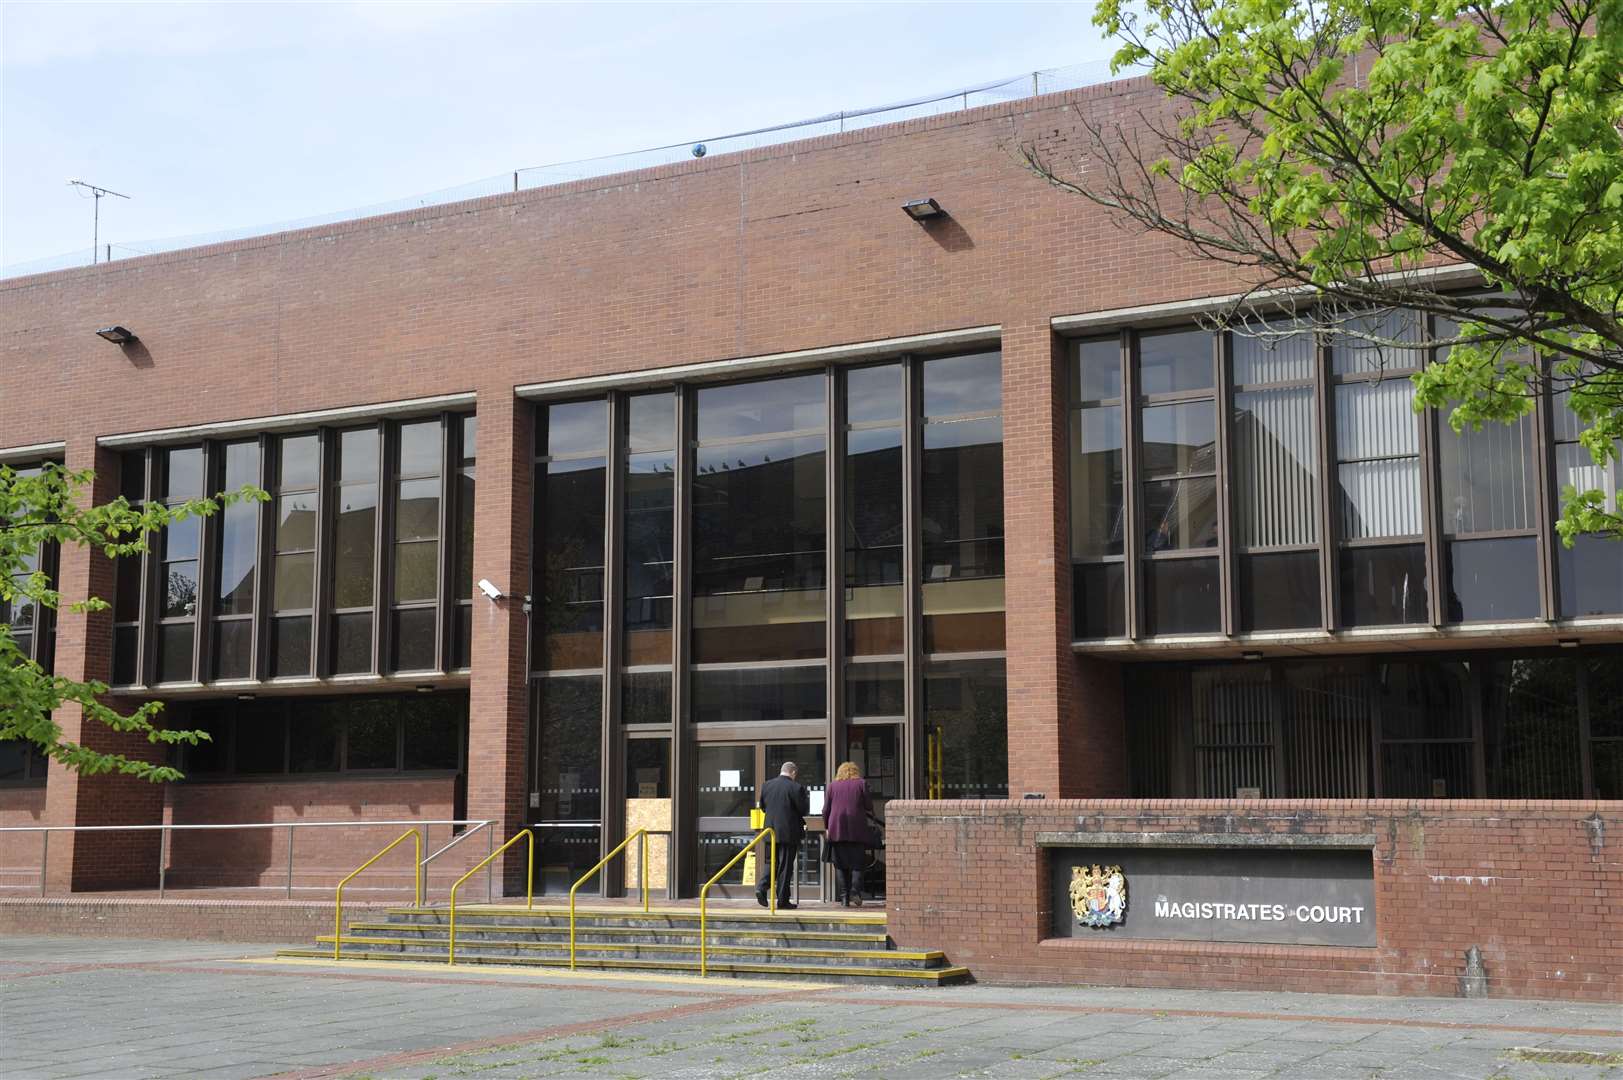 The hearing took place at Folkestone Magistrates Court